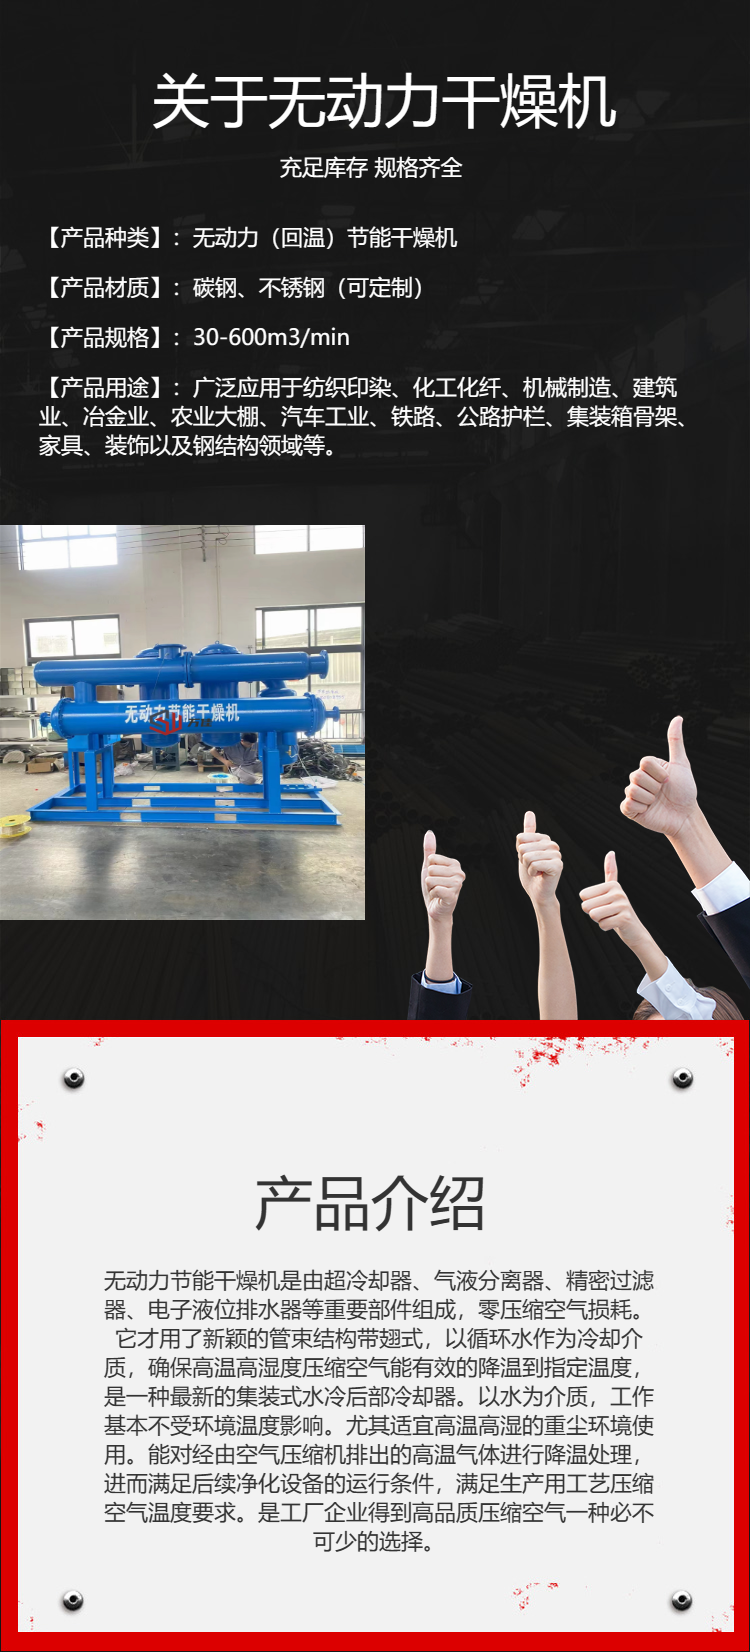 Textile printing and dyeing compressed air dehydration and oil removal without power, energy-saving water-cooled drying and dehydration machine, frozen adsorption type